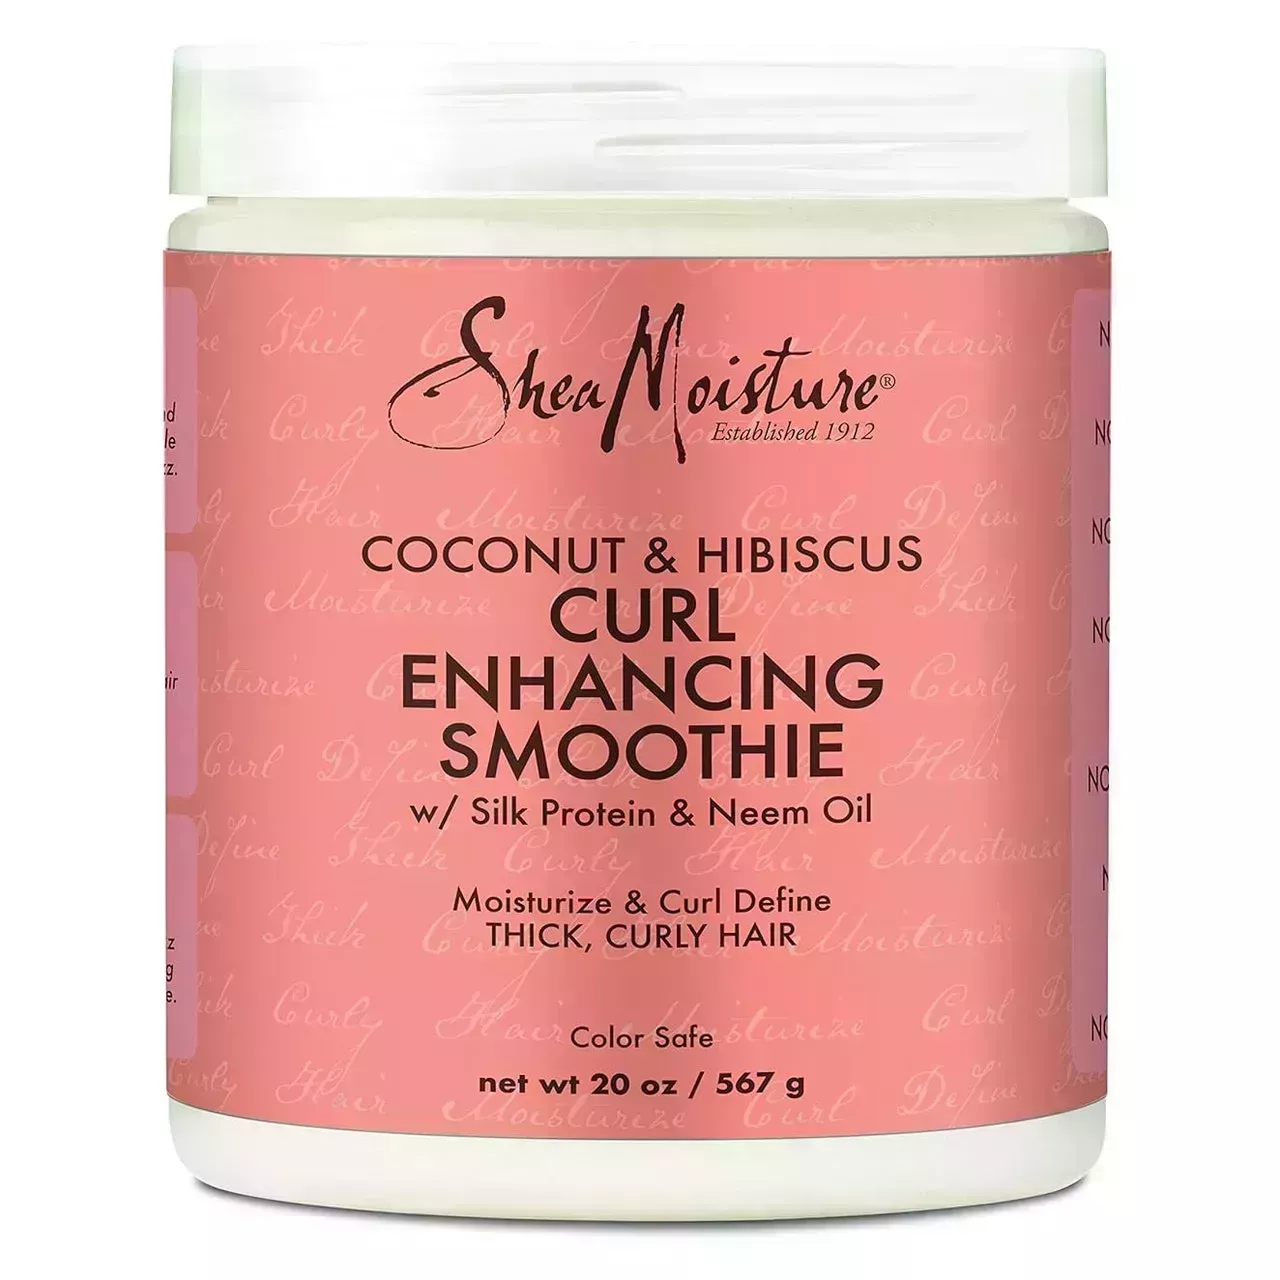 Shea Moisture Curl Enhancing Smoothie white jar with pink label on white background